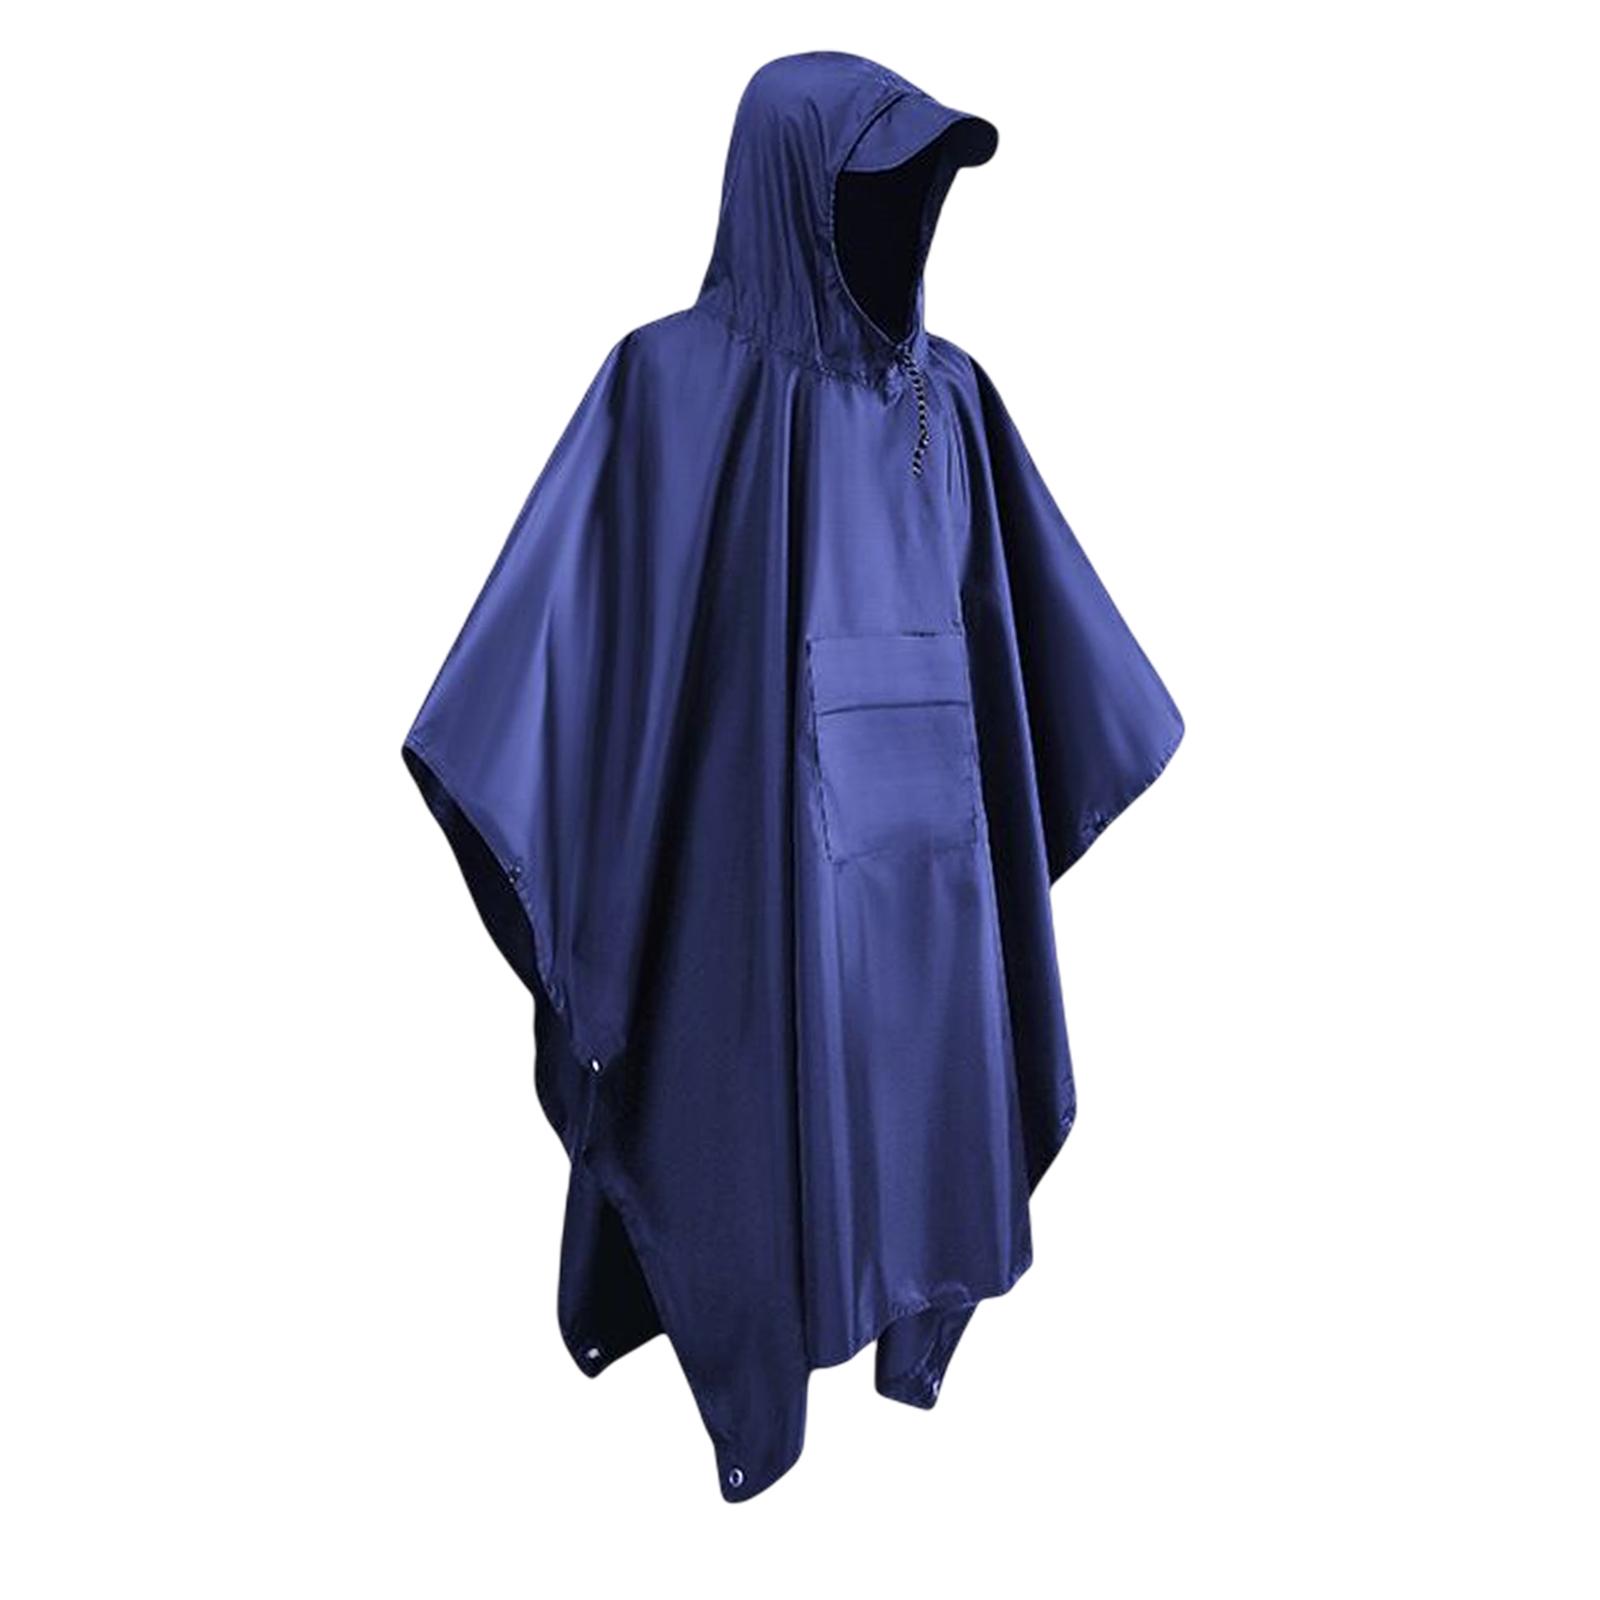 Wet Weather Rain Poncho with Pocket Reusable Adult Emergency Outdoor Blue